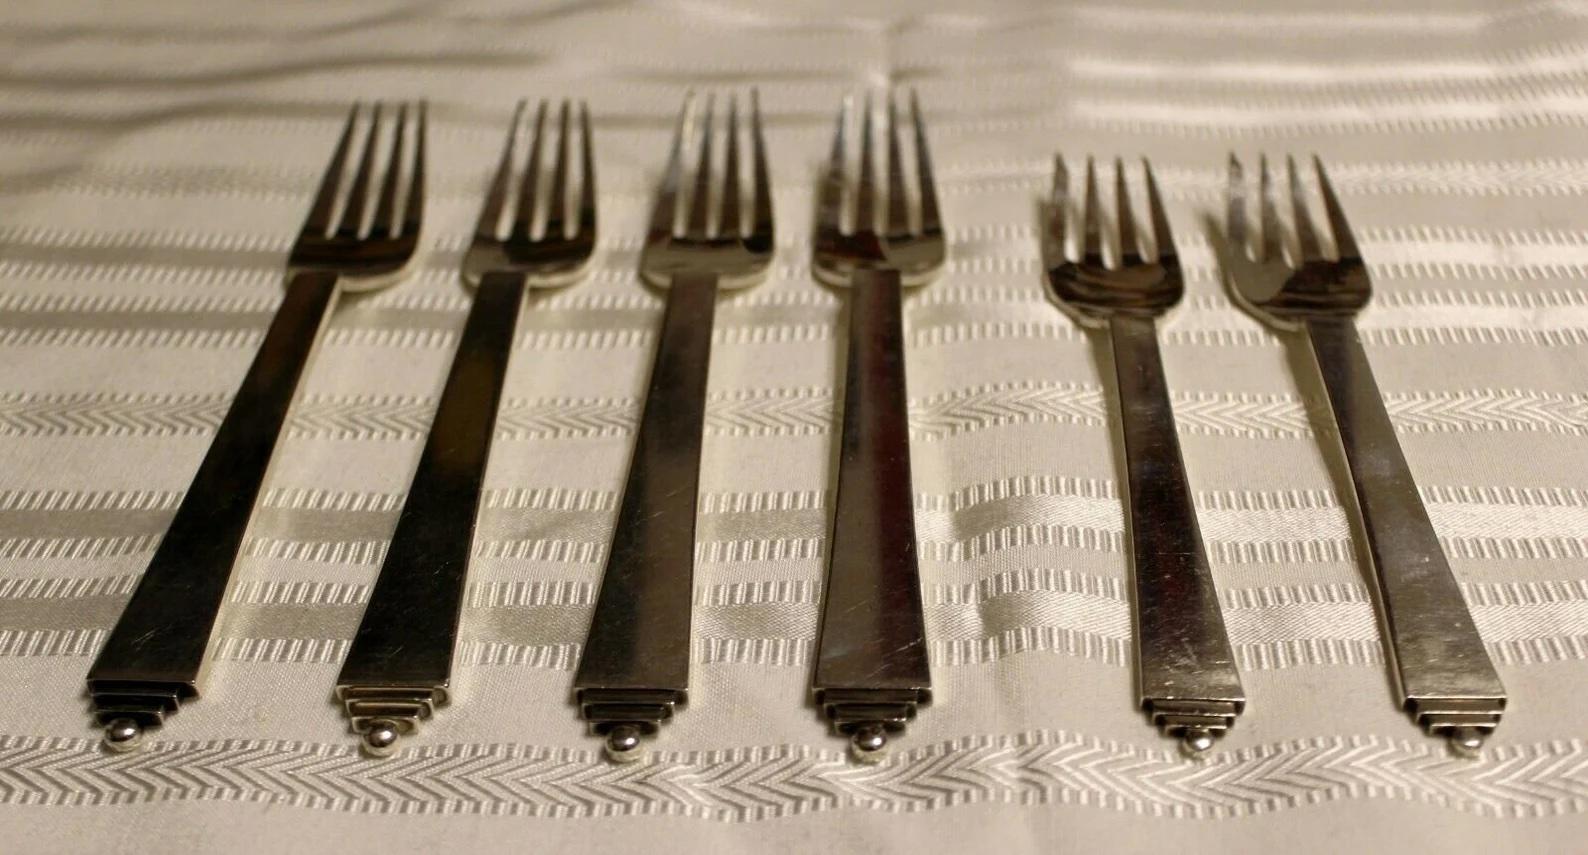 For your consideration is a great set of Georg Jensen, sterling silver pyramid pattern forks, circa 1945. In excellent vintage condition. The dimensions are 7